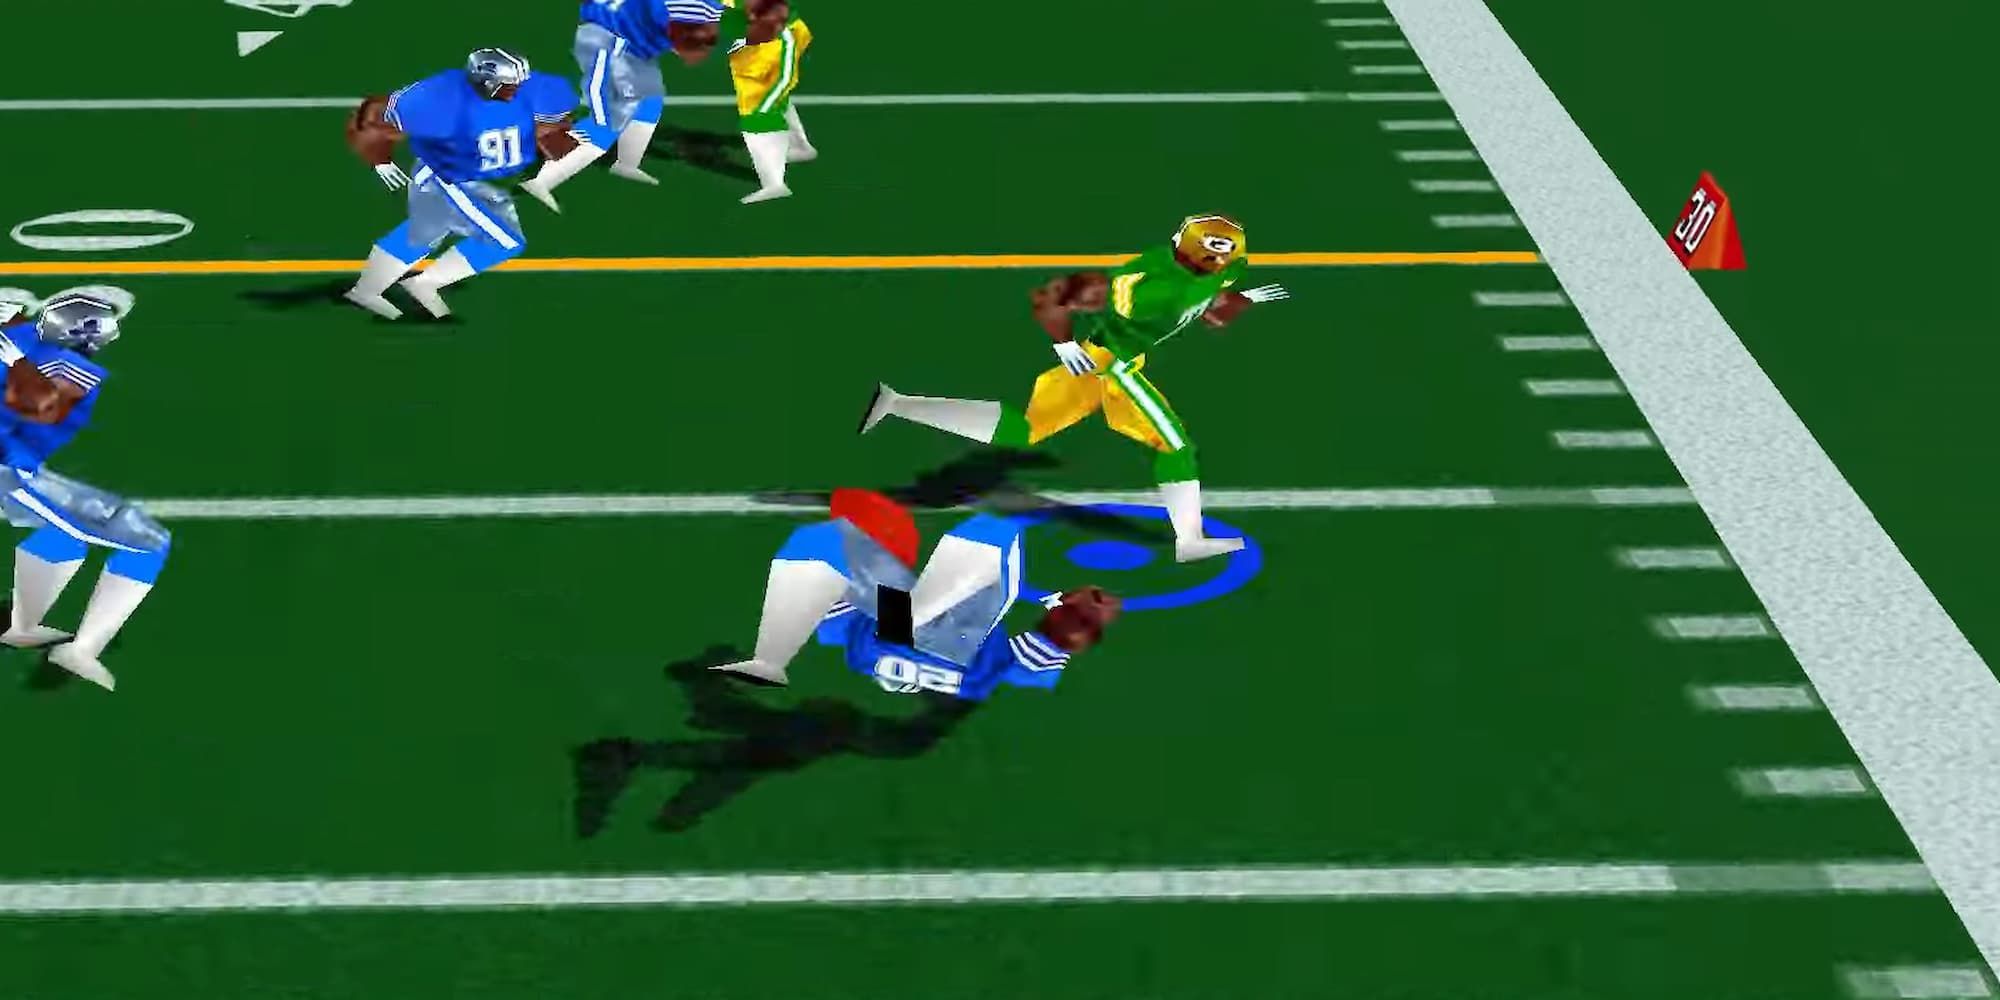 A Detroit Lions player was blown out after a tackle by a Green Bay Packers player at NFL Blitz 2000.